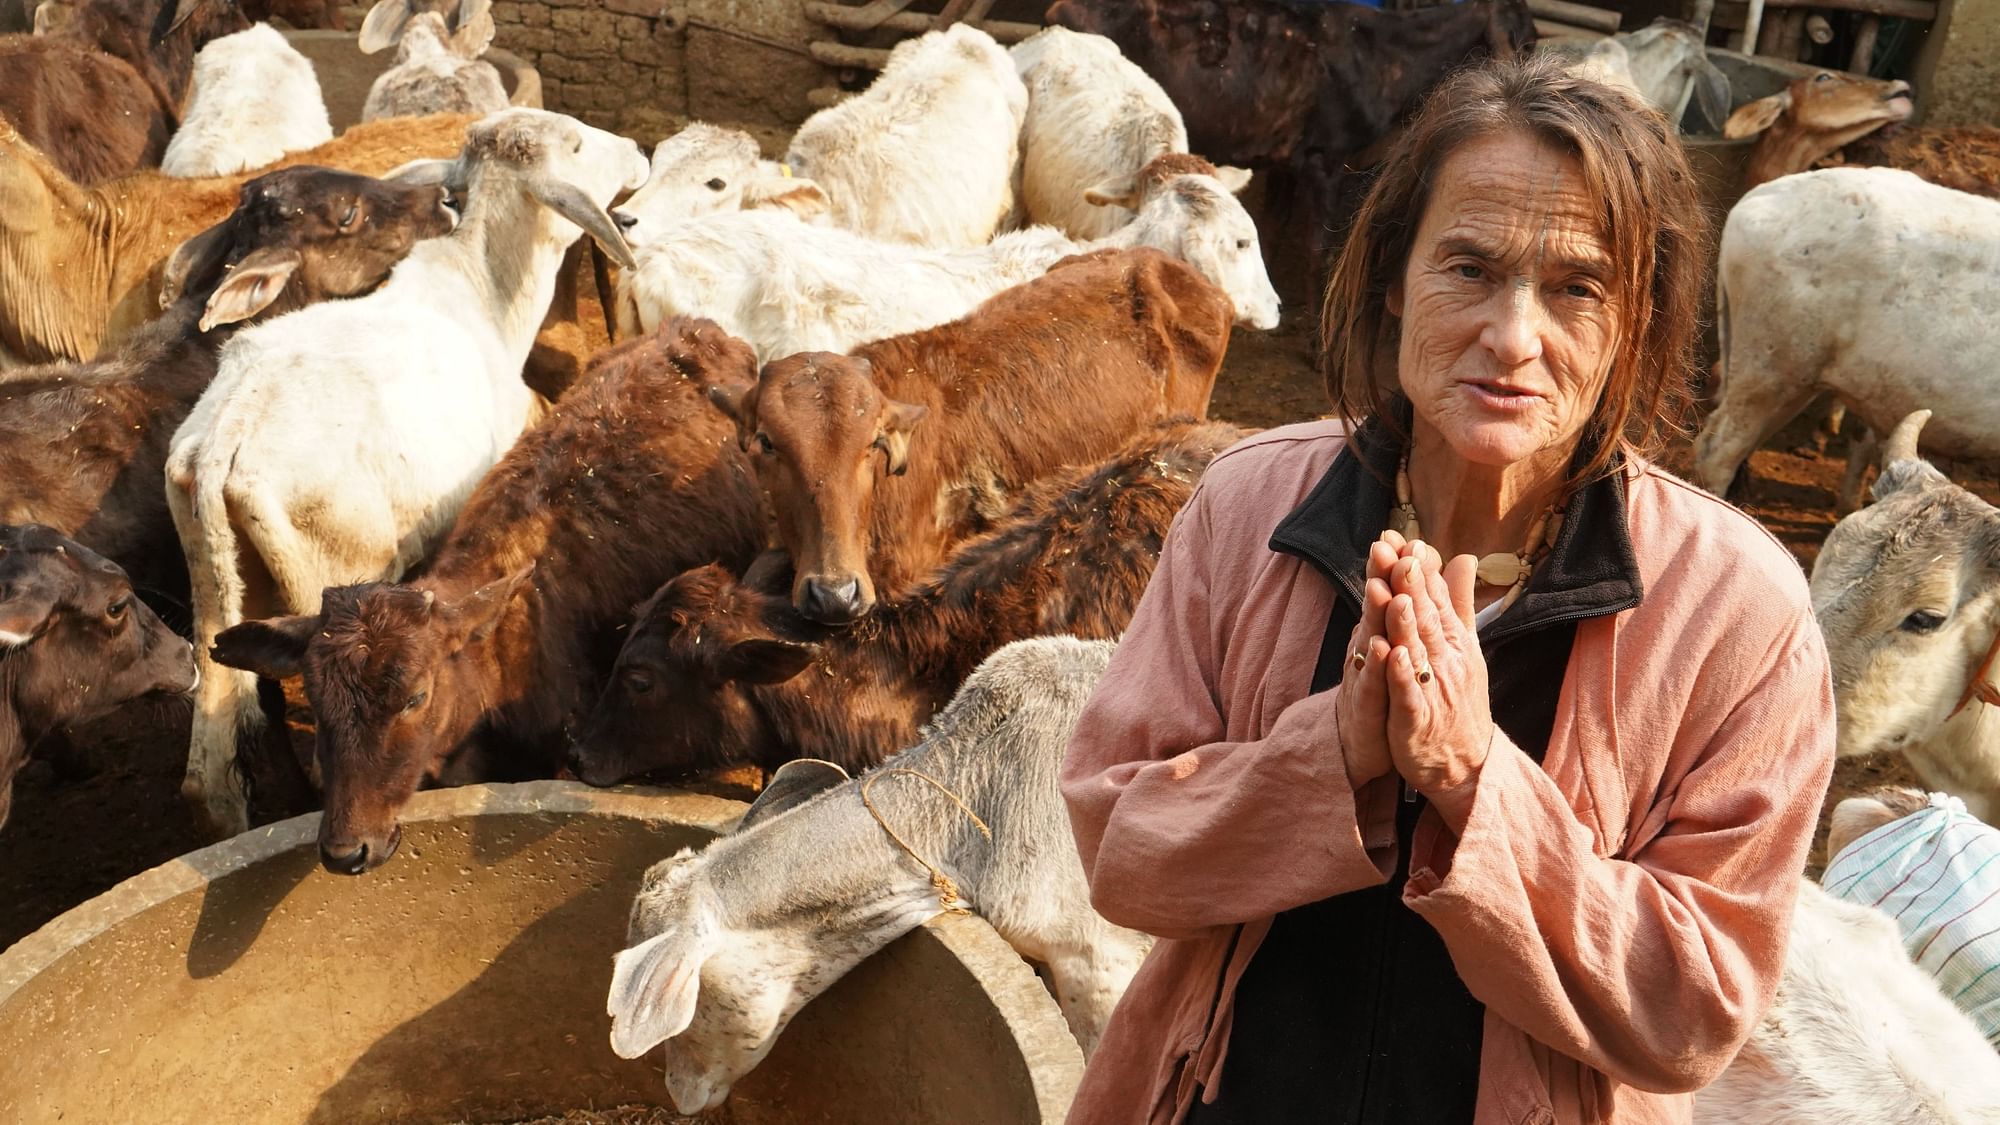 A Padma Shri Awardee, Sudevi Dasi has been taking care of cows for the last 40 years in Mathura.